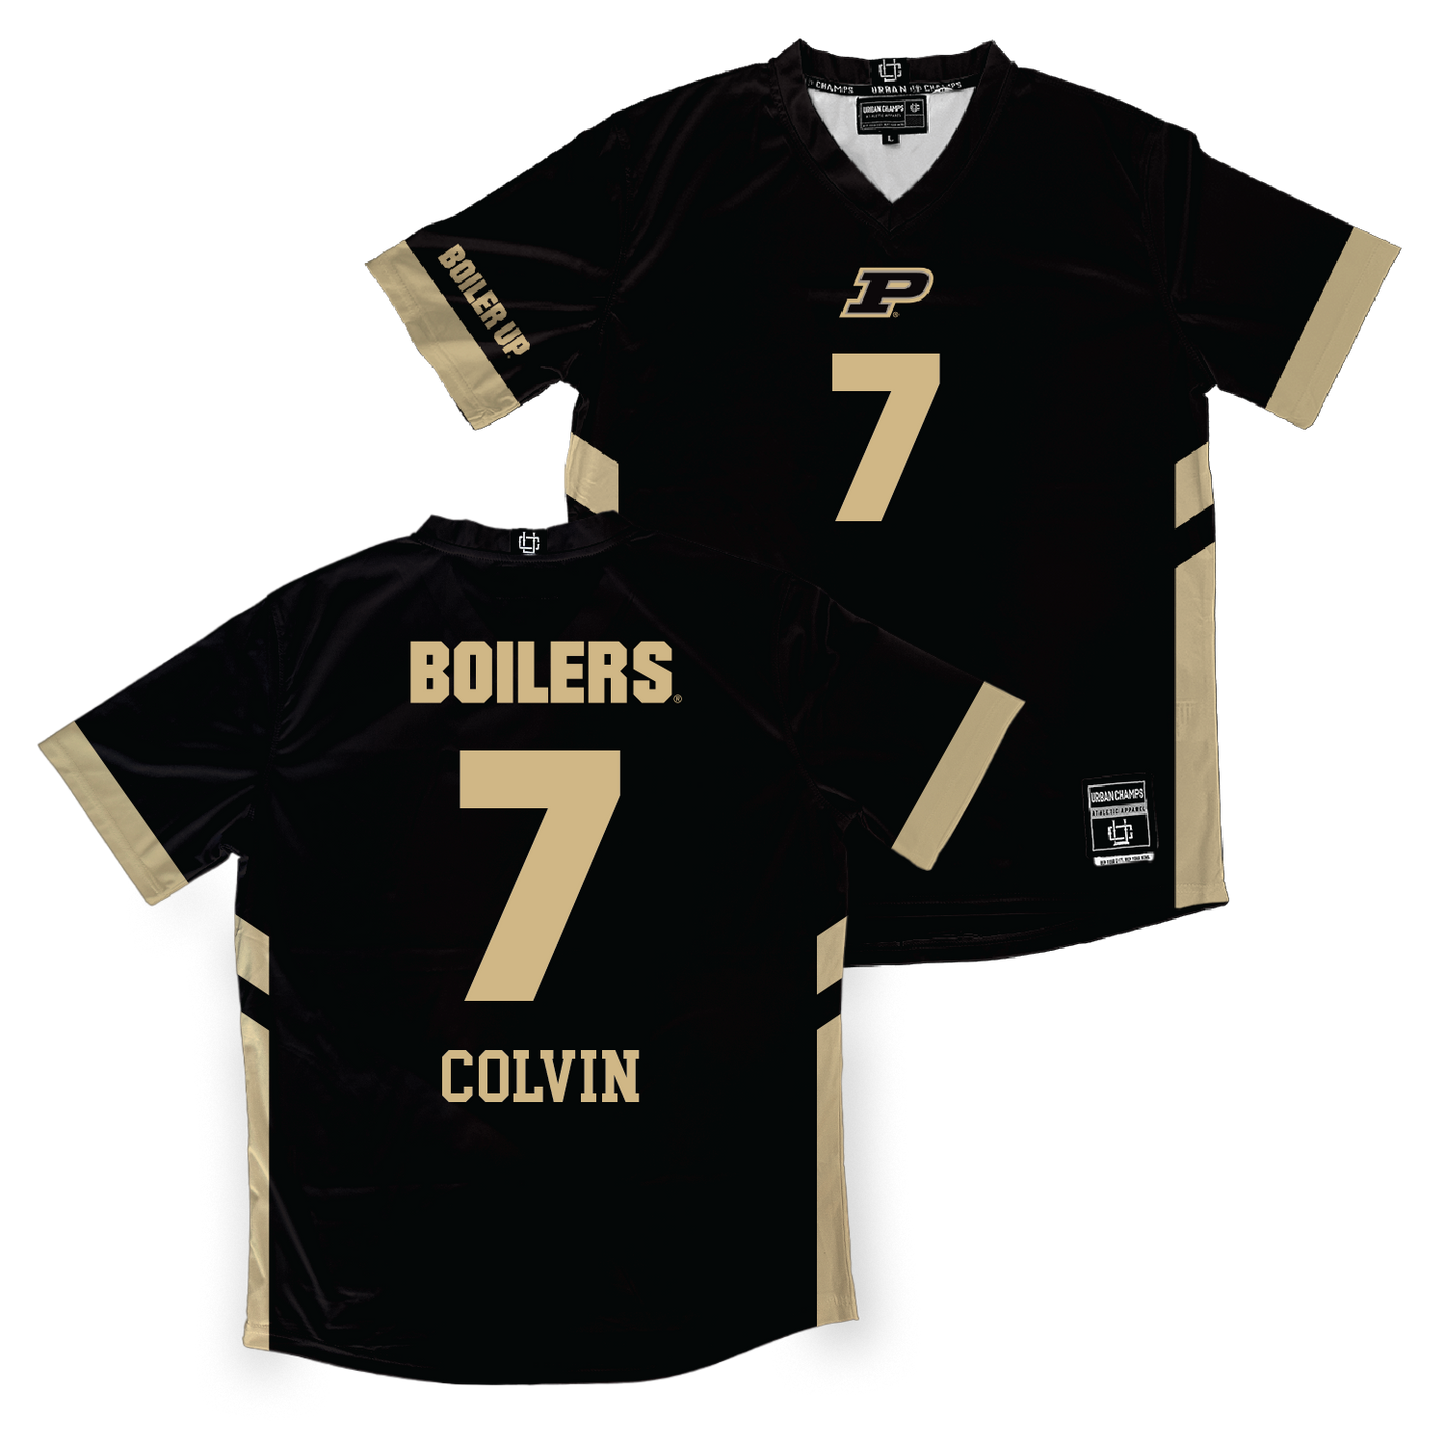 Black Purdue Women's Volleyball Jersey - Raven Colvin | #7 Youth Small